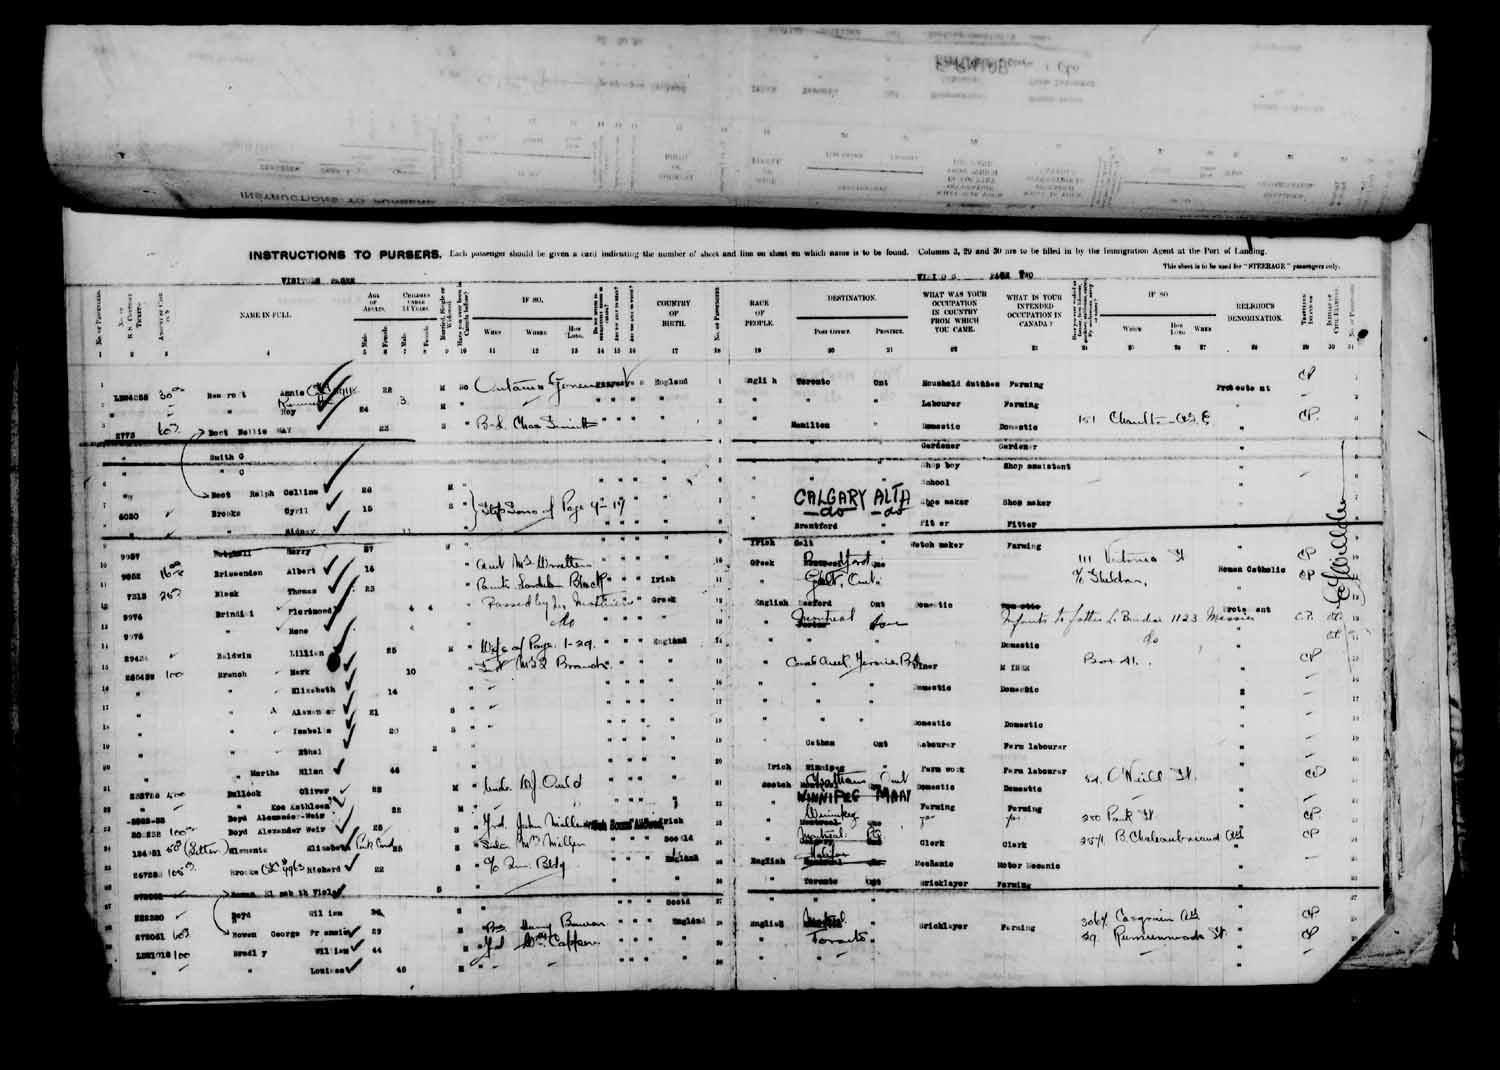 Digitized page of Passenger Lists for Image No.: e003610642